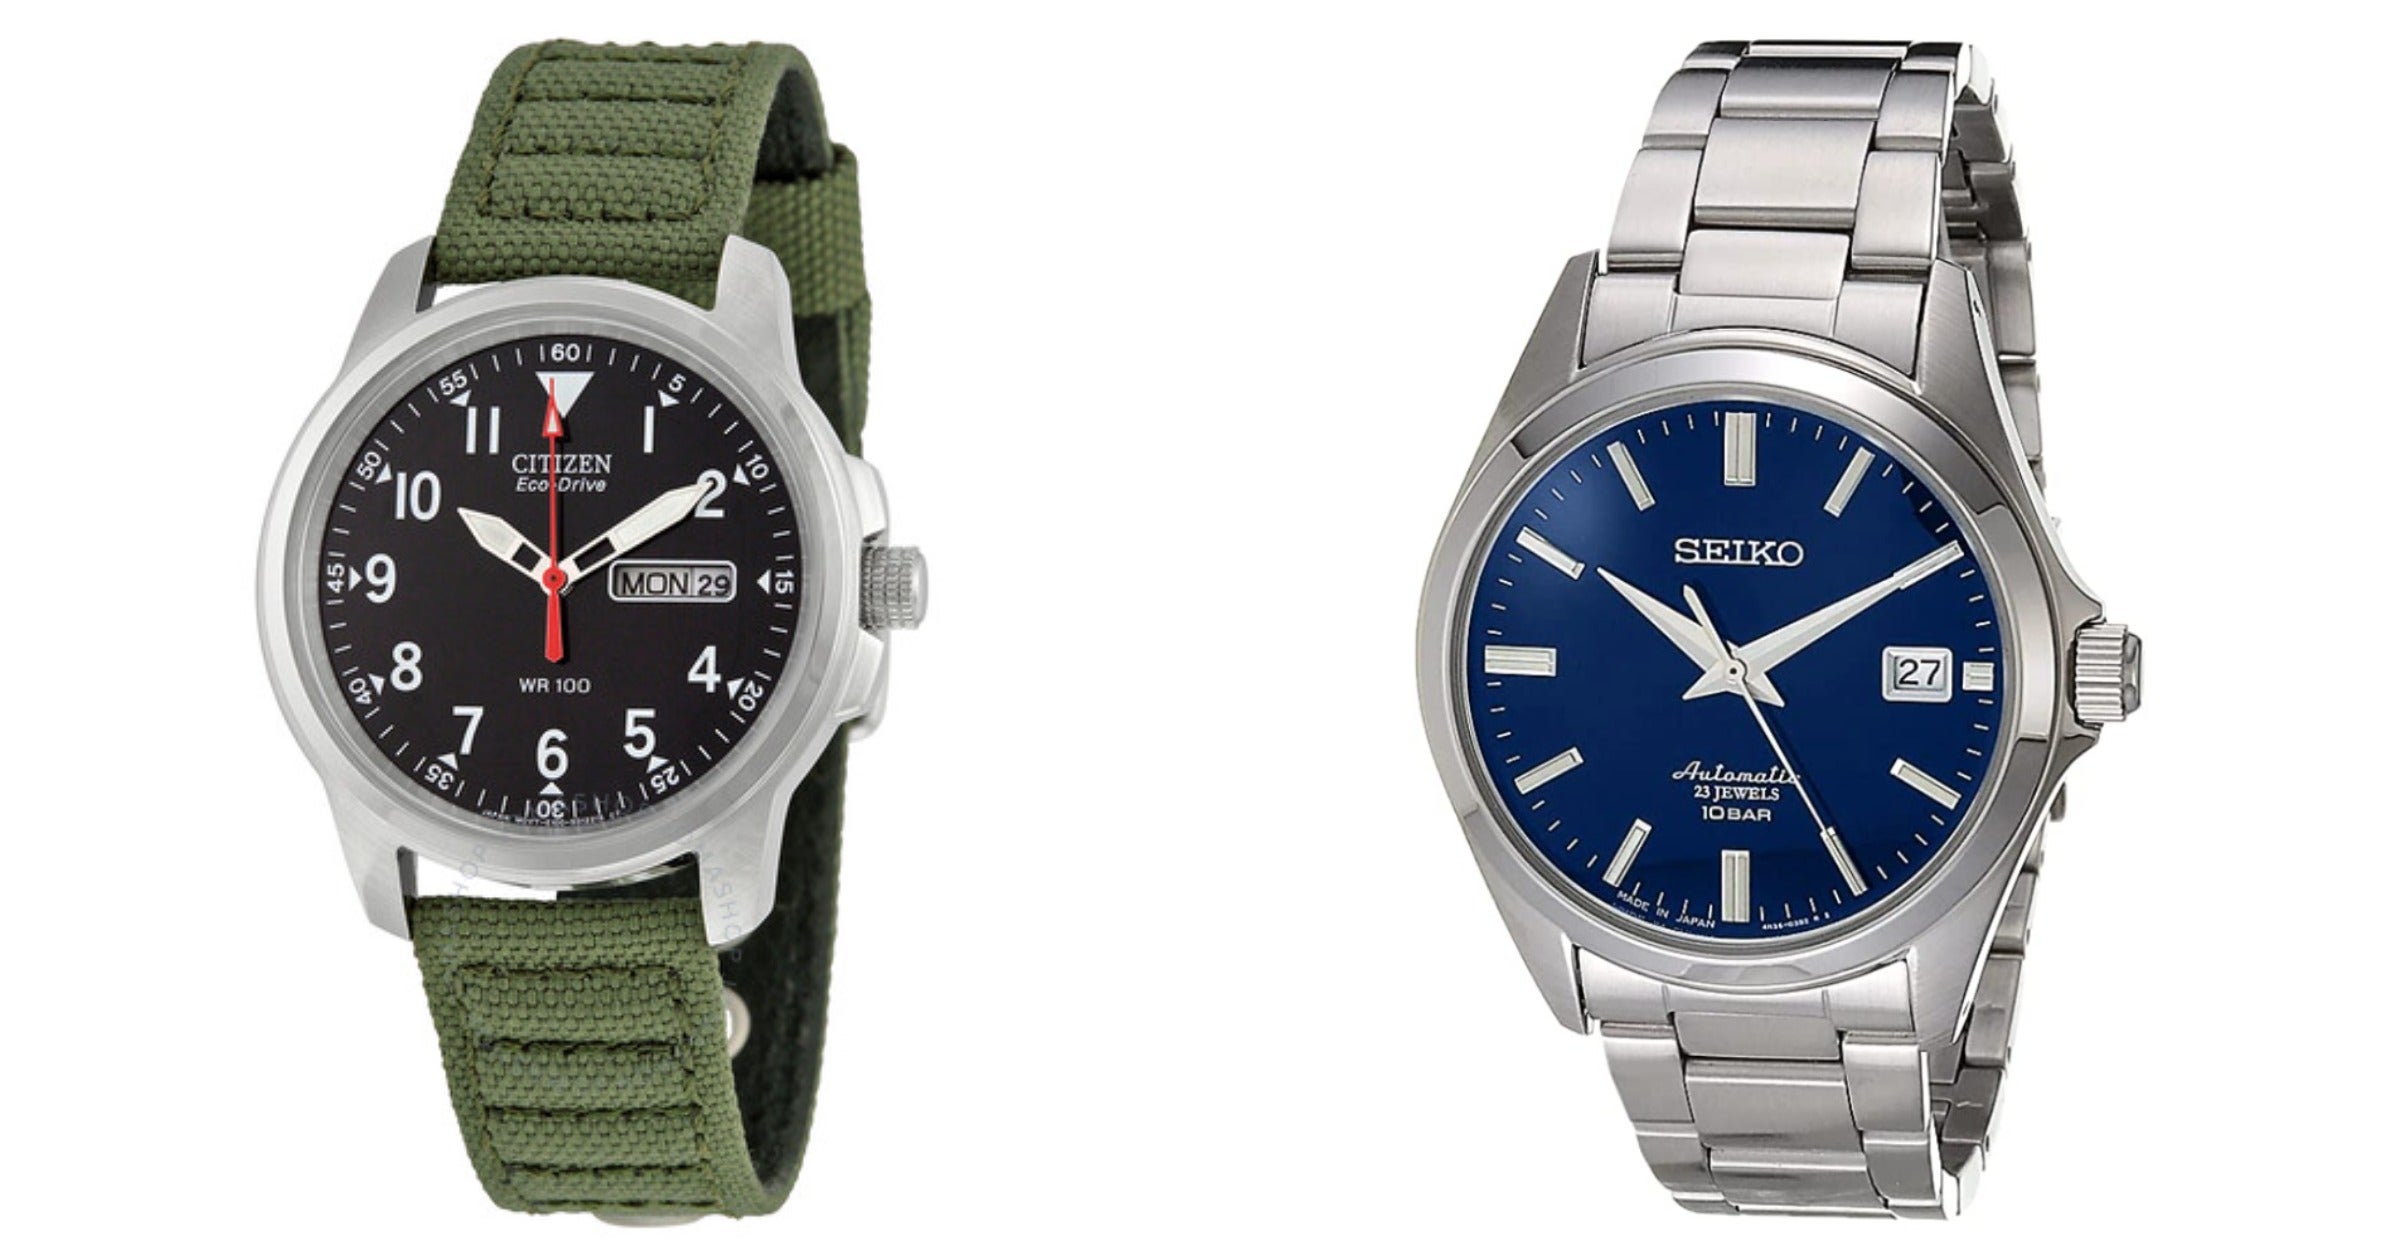 Amazon deals: Score Seiko and Citizen watches for more than 50% off